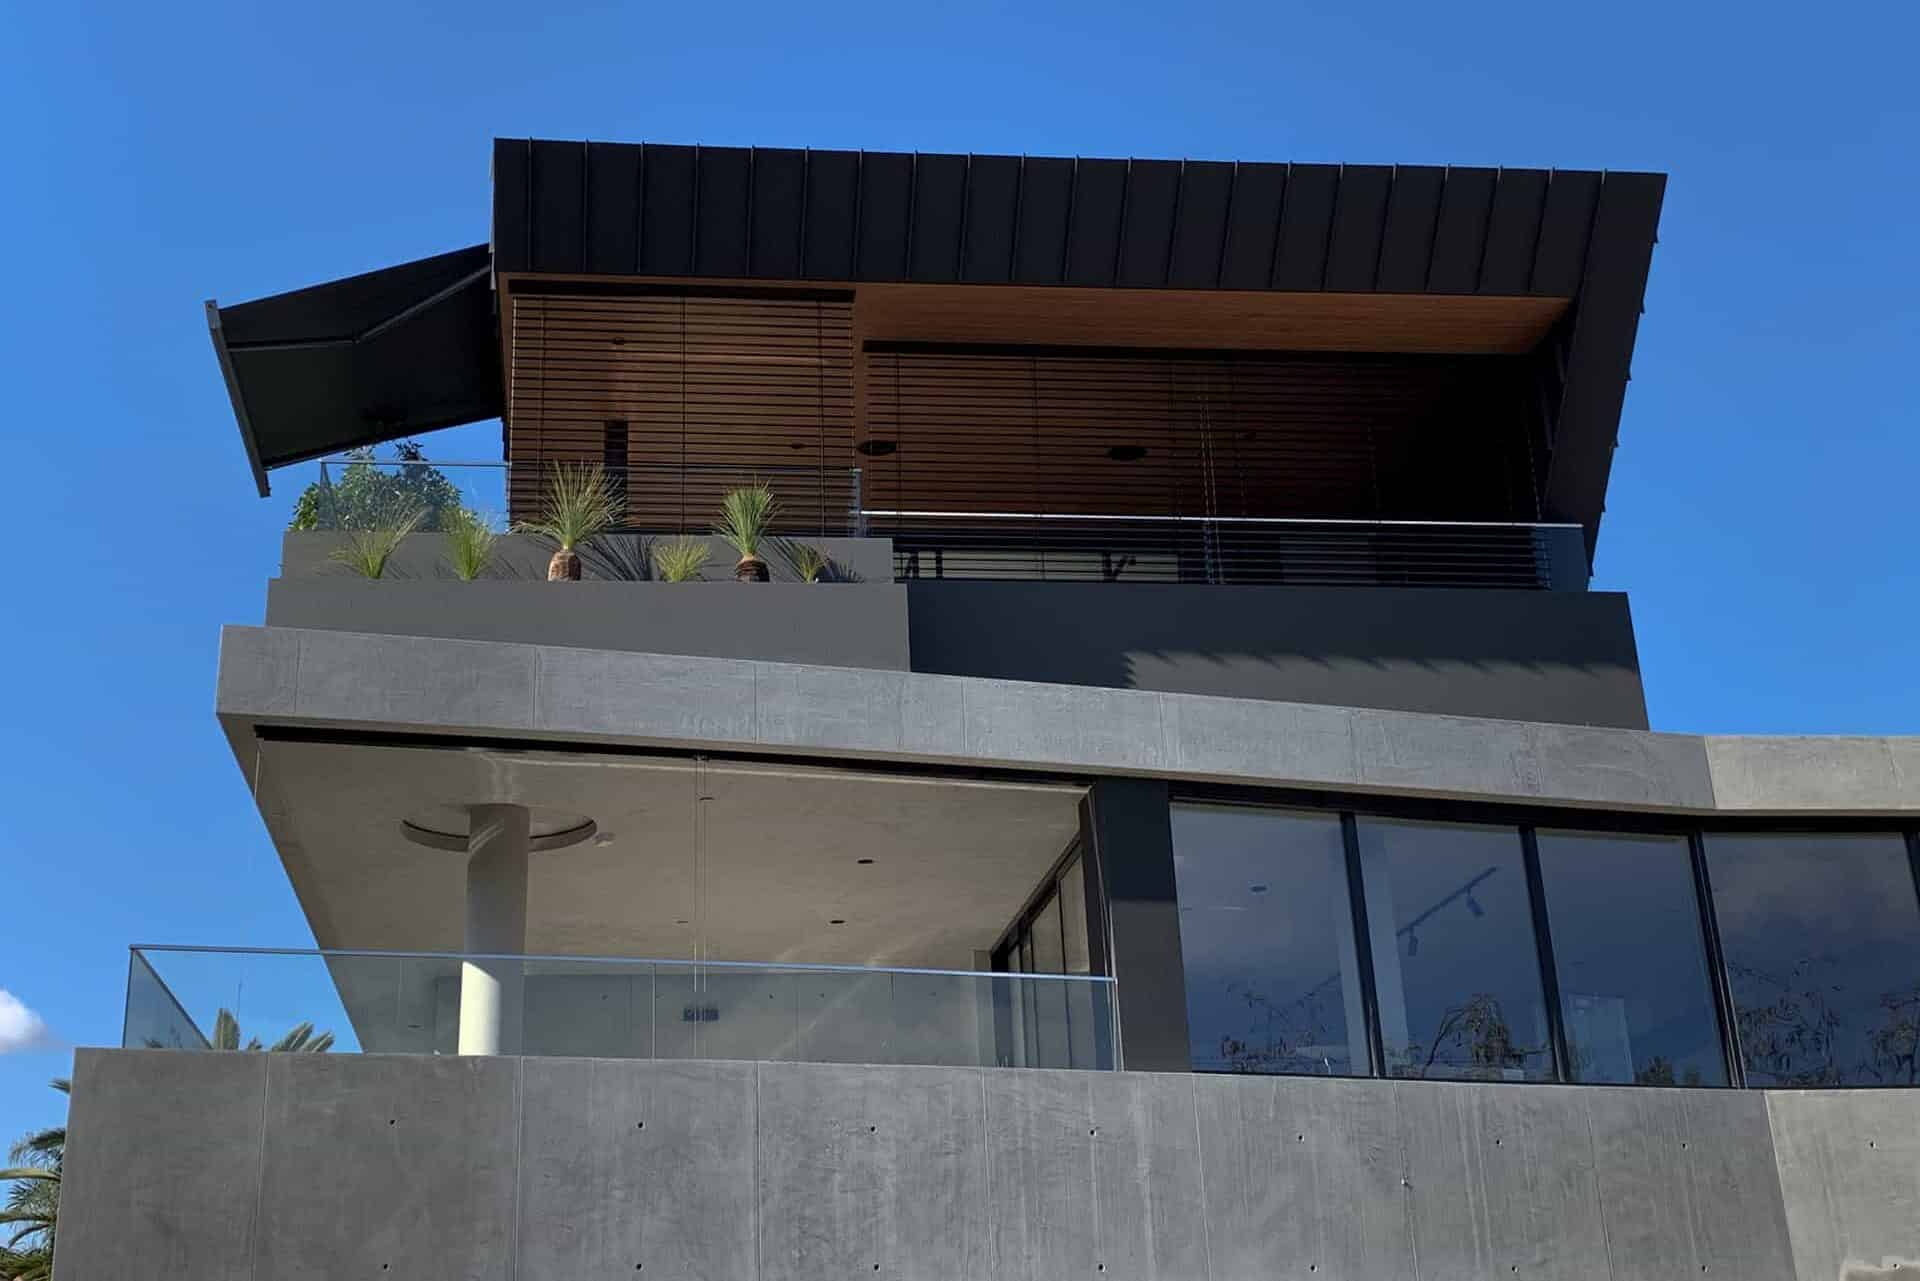 Folding Arm Awnings & Markilux Awnings Stockist - a view looking up at double story house